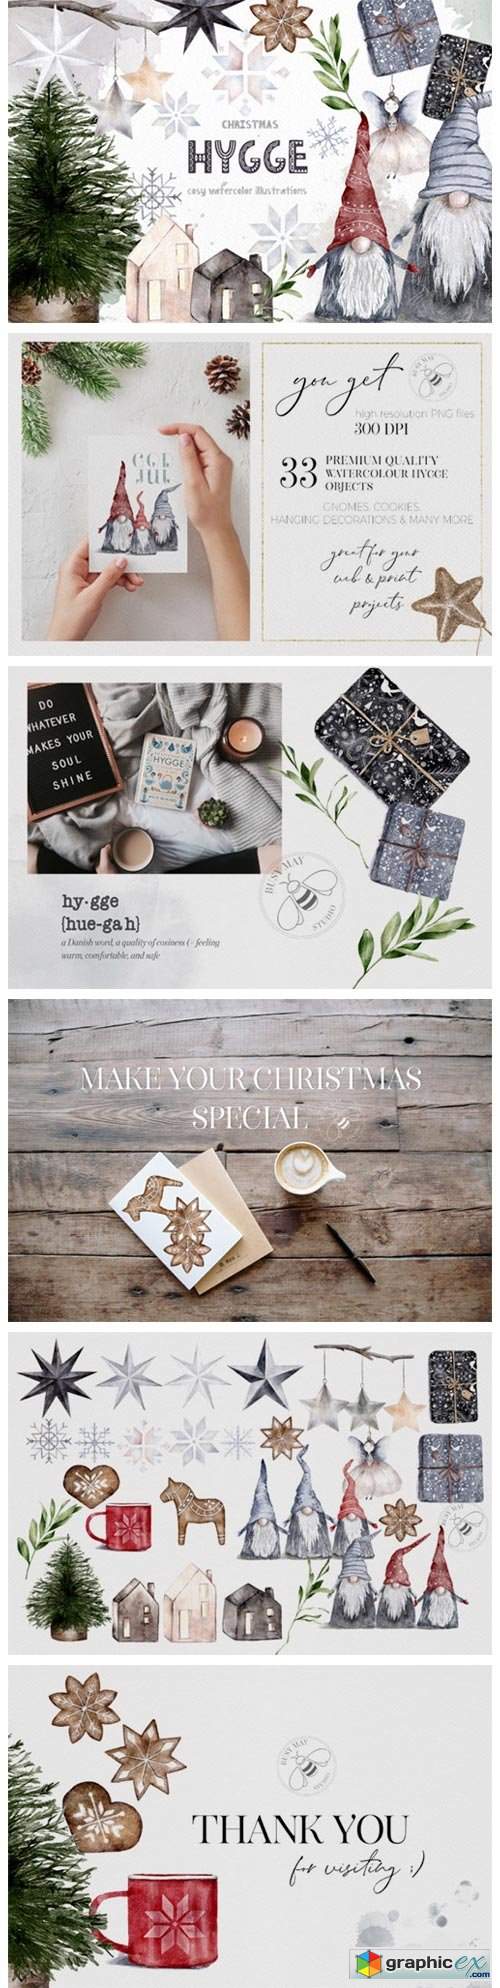 Download Hygge Christmas Watercolor Illustrations Free Download Vector Stock Image Photoshop Icon